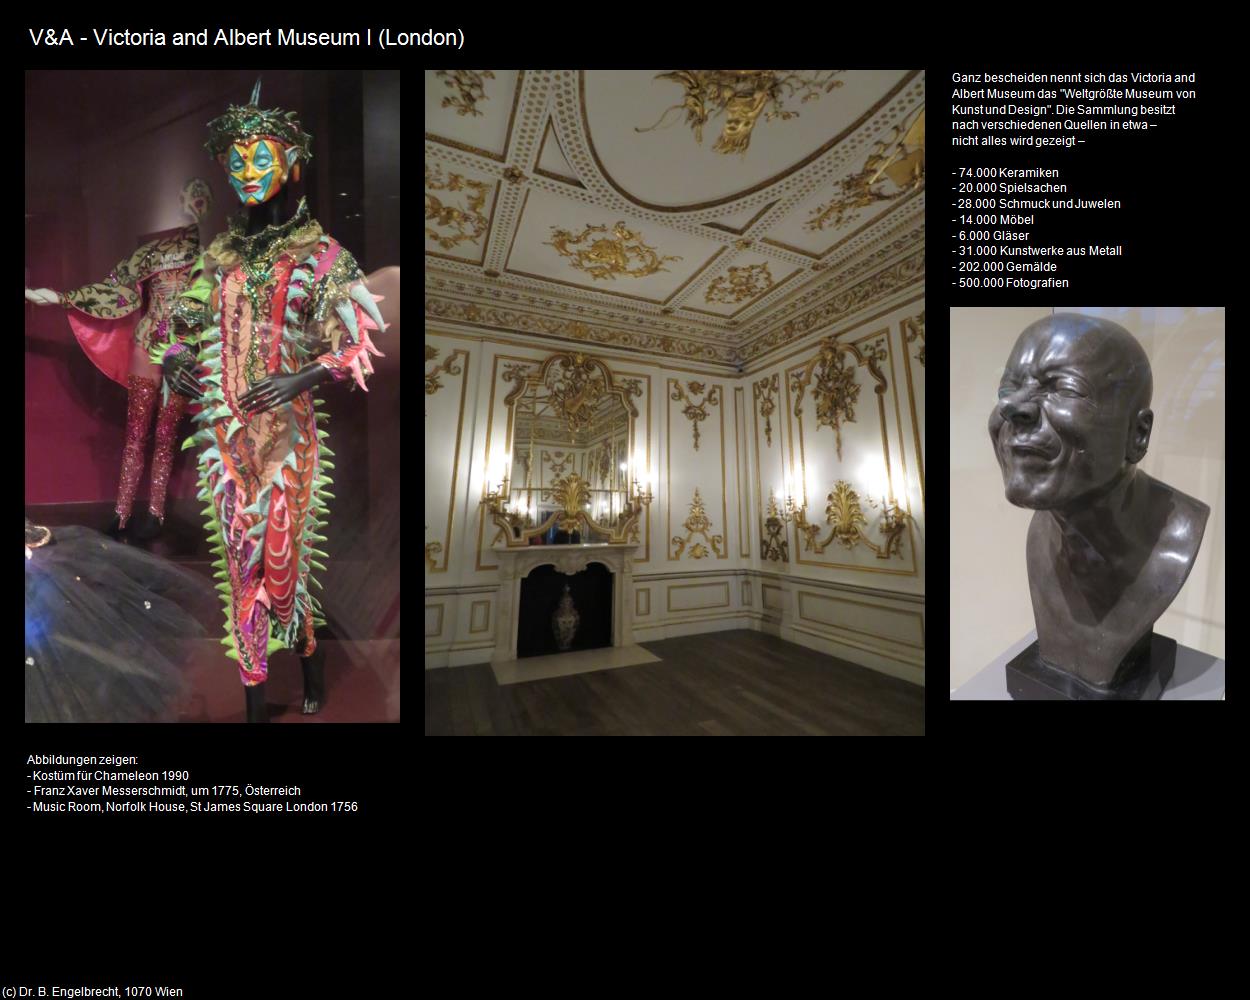 V&A - Victoria and Albert Museum I (London, England) in Kulturatlas-ENGLAND und WALES